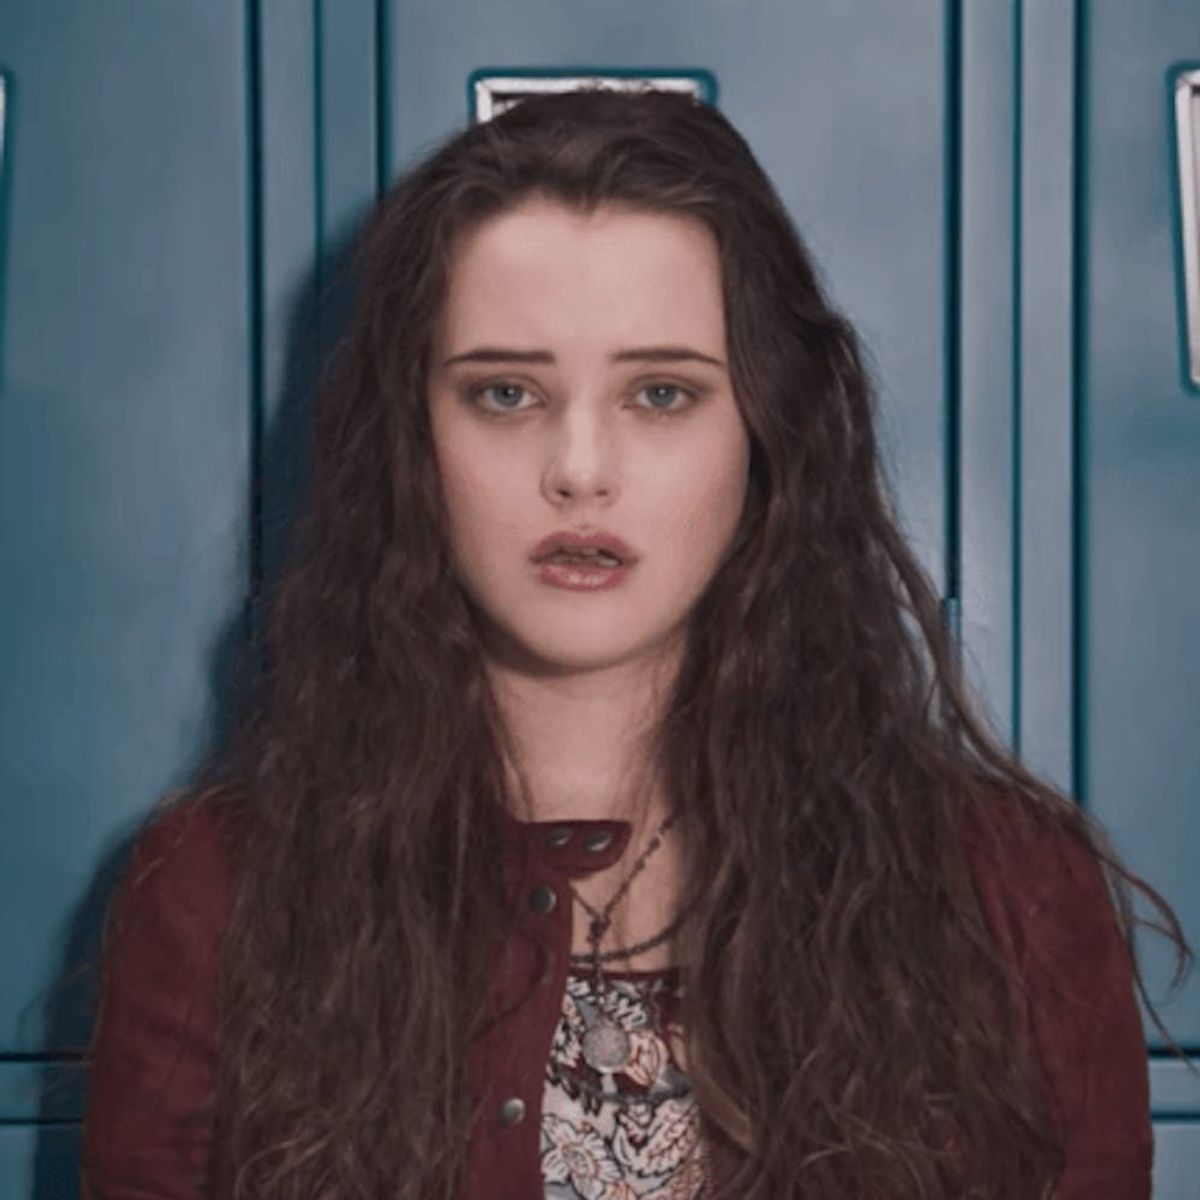 13 Shows to Watch If You Loved 13 Reasons Why